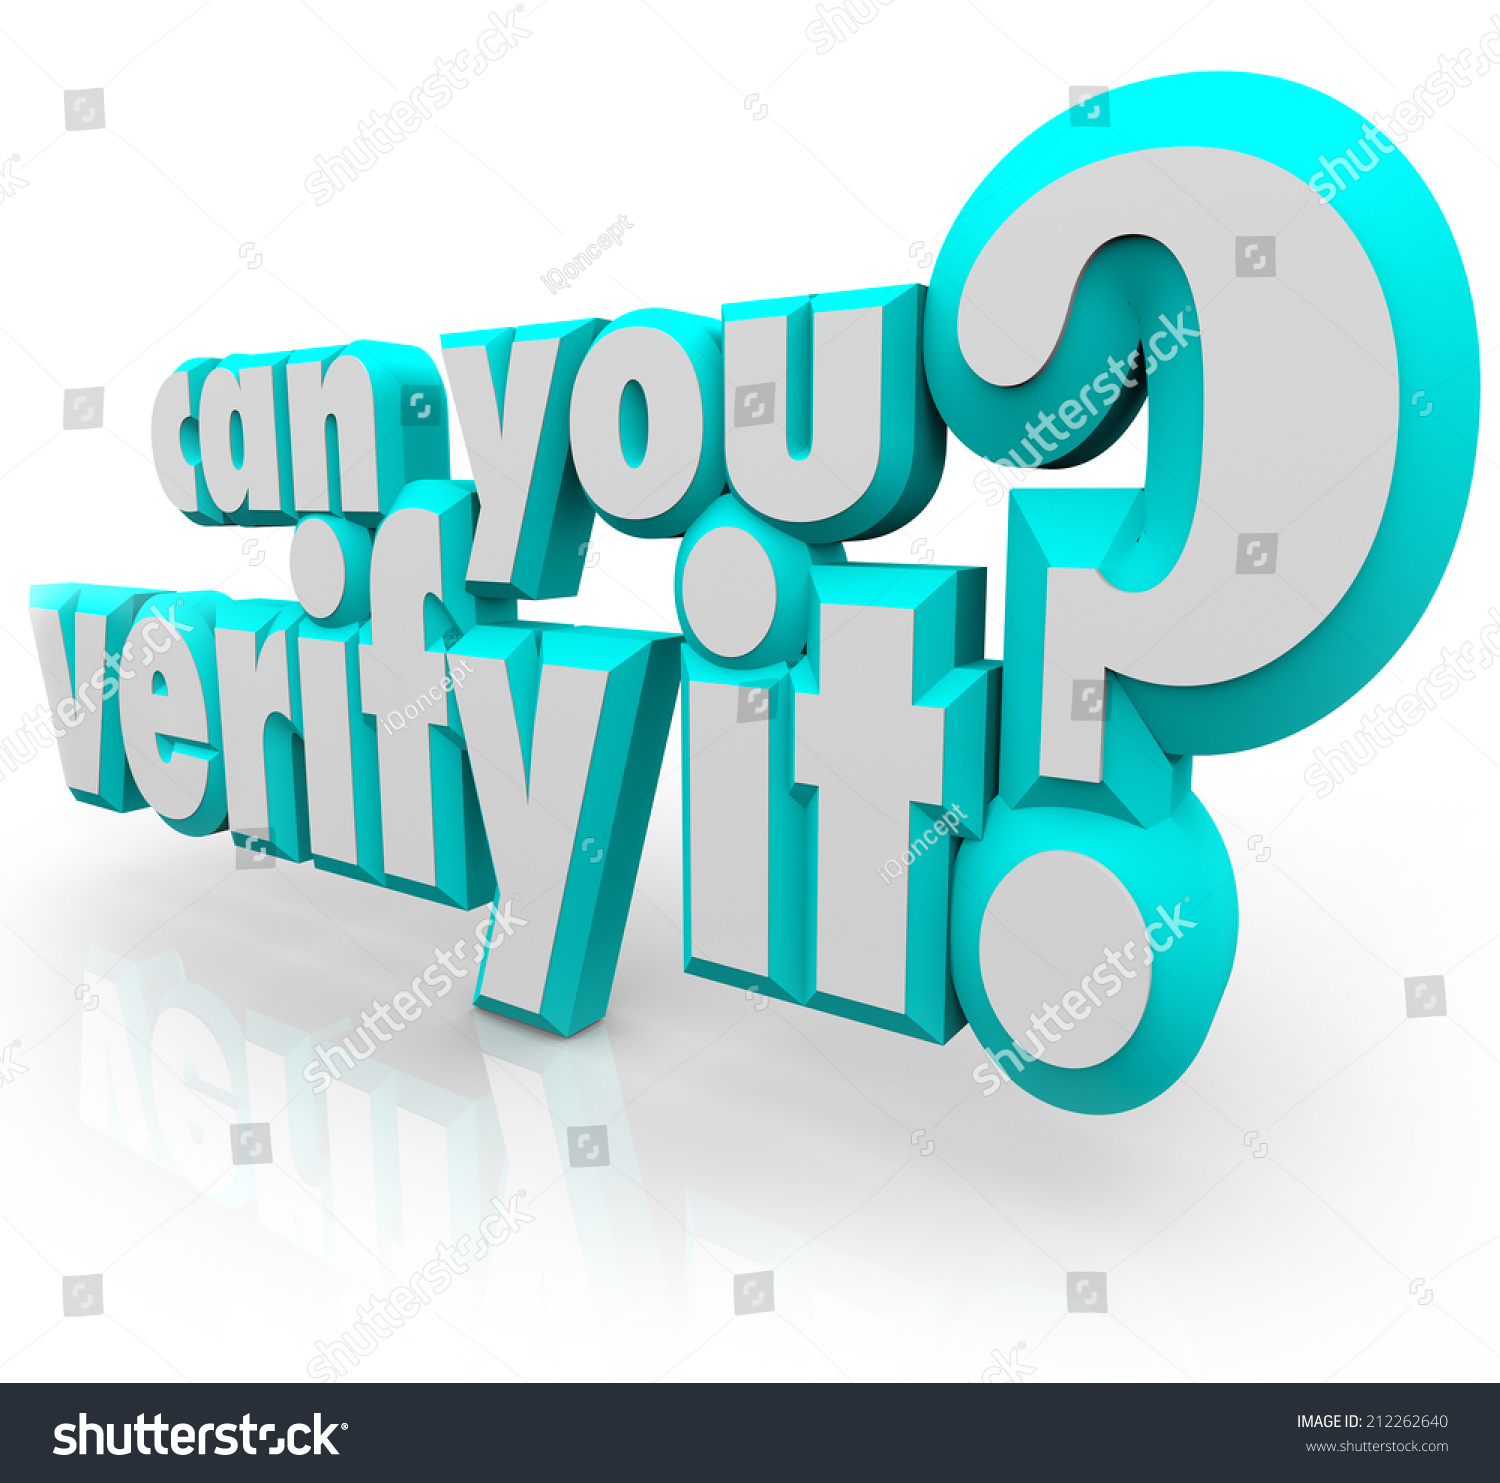 can-you-verify-words-3d-letters-212262640-shutterstock